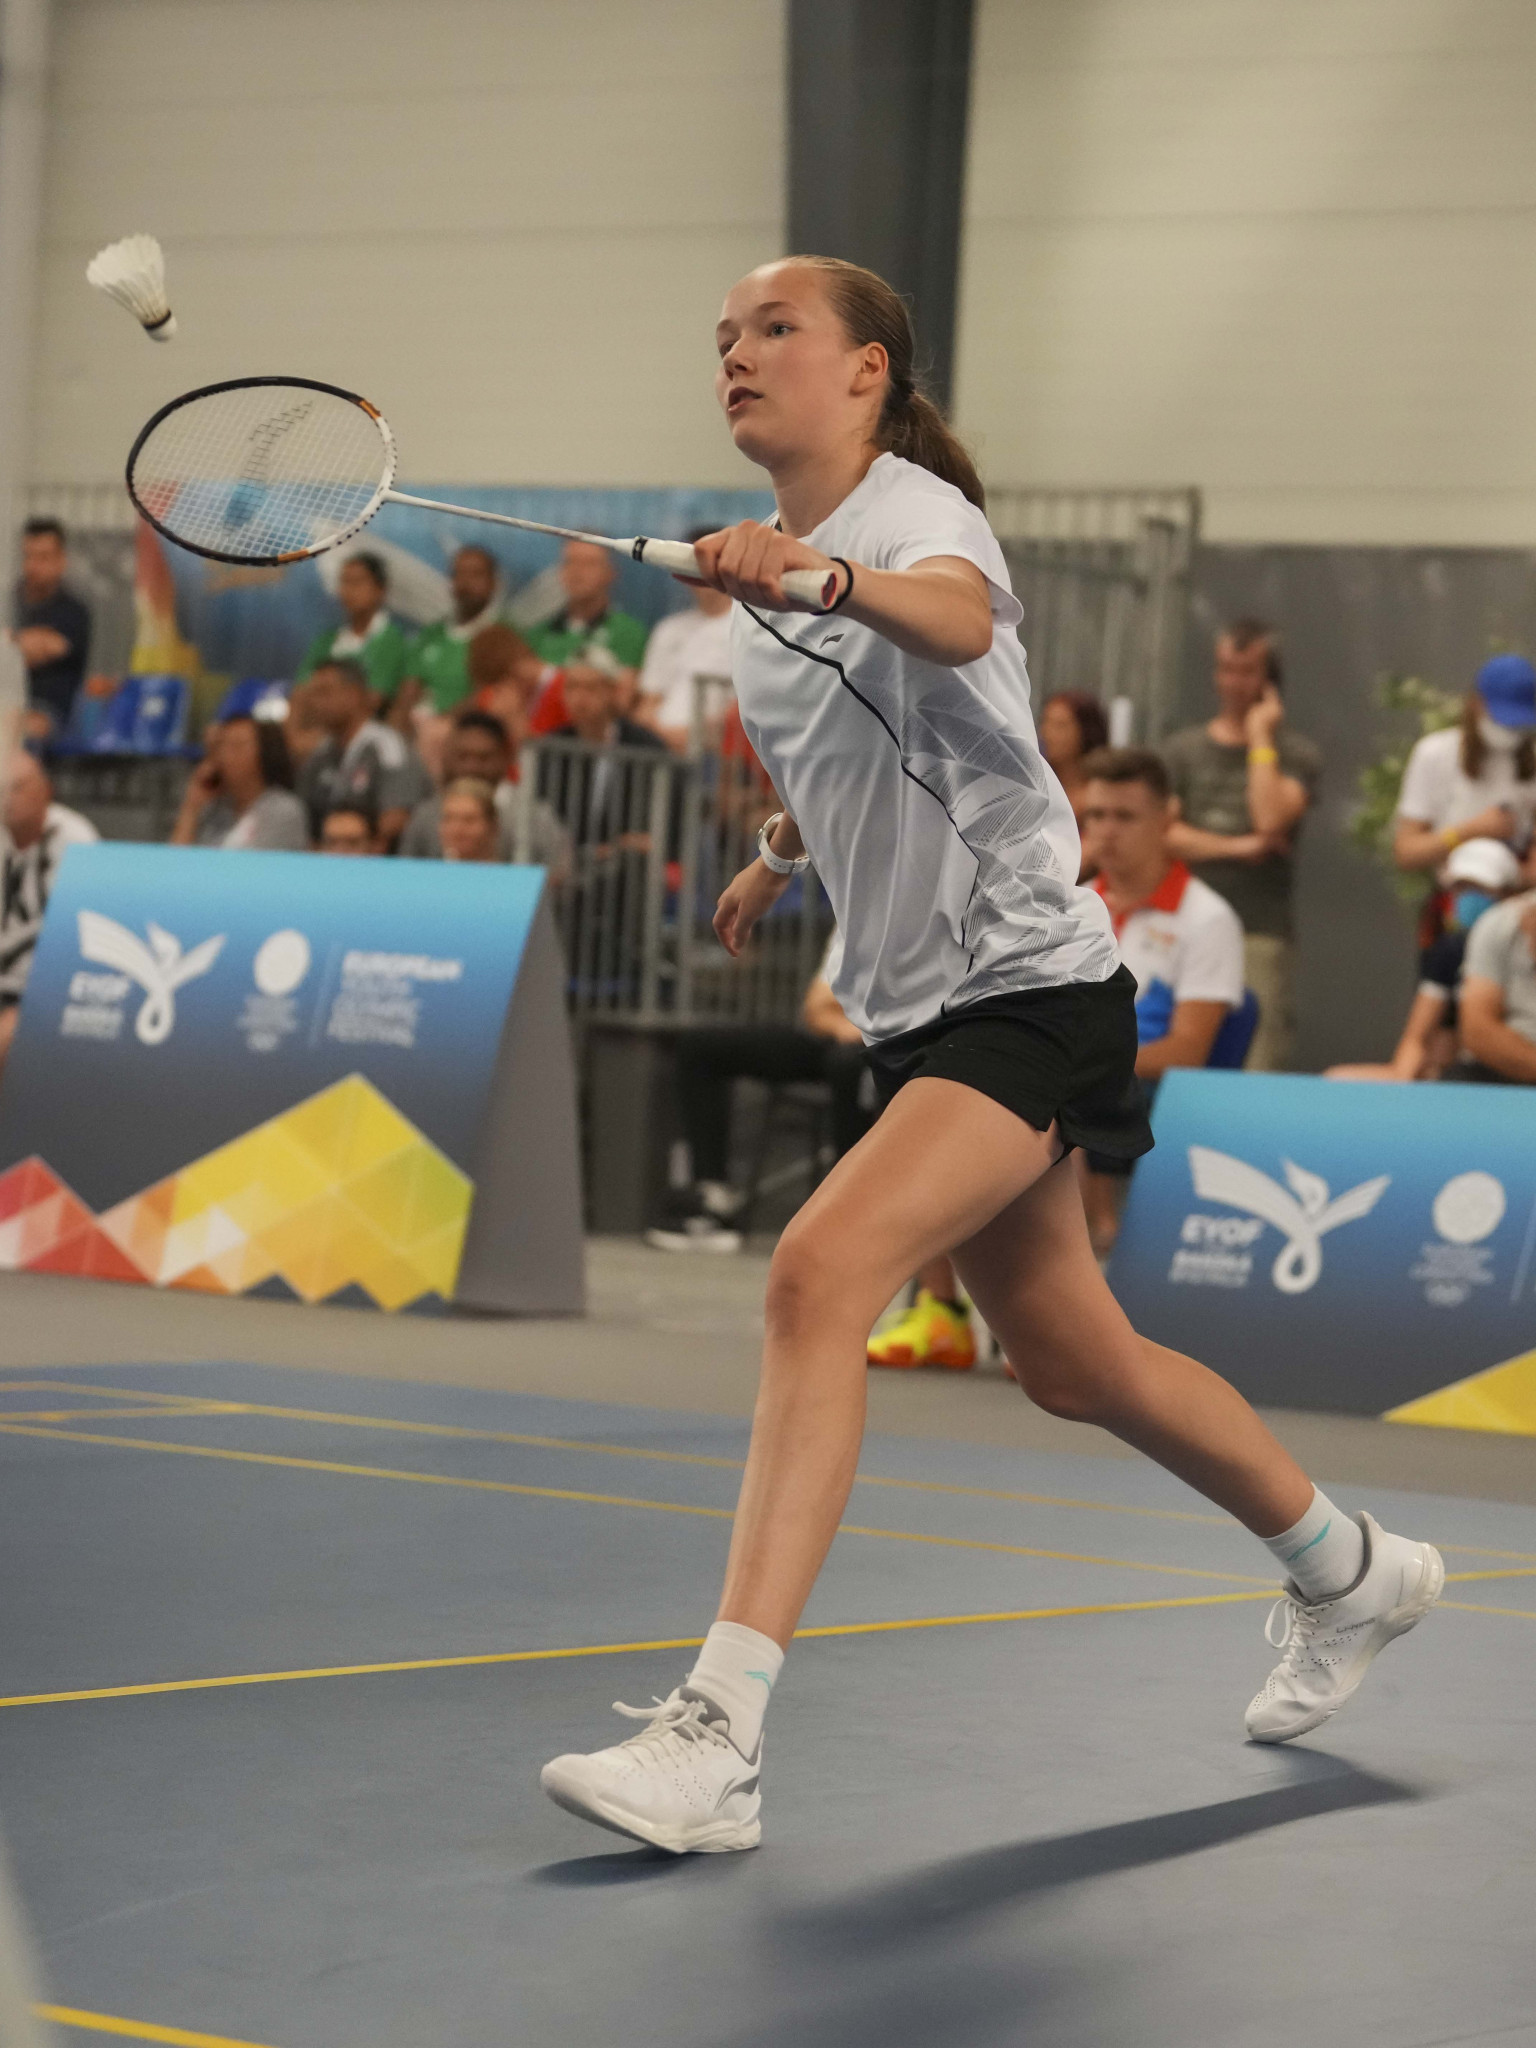 Nella Nyqvist came from behind to finish the EYOF girls' badminton singles tournament as champion ©EYOF Banská Bystrica 2022